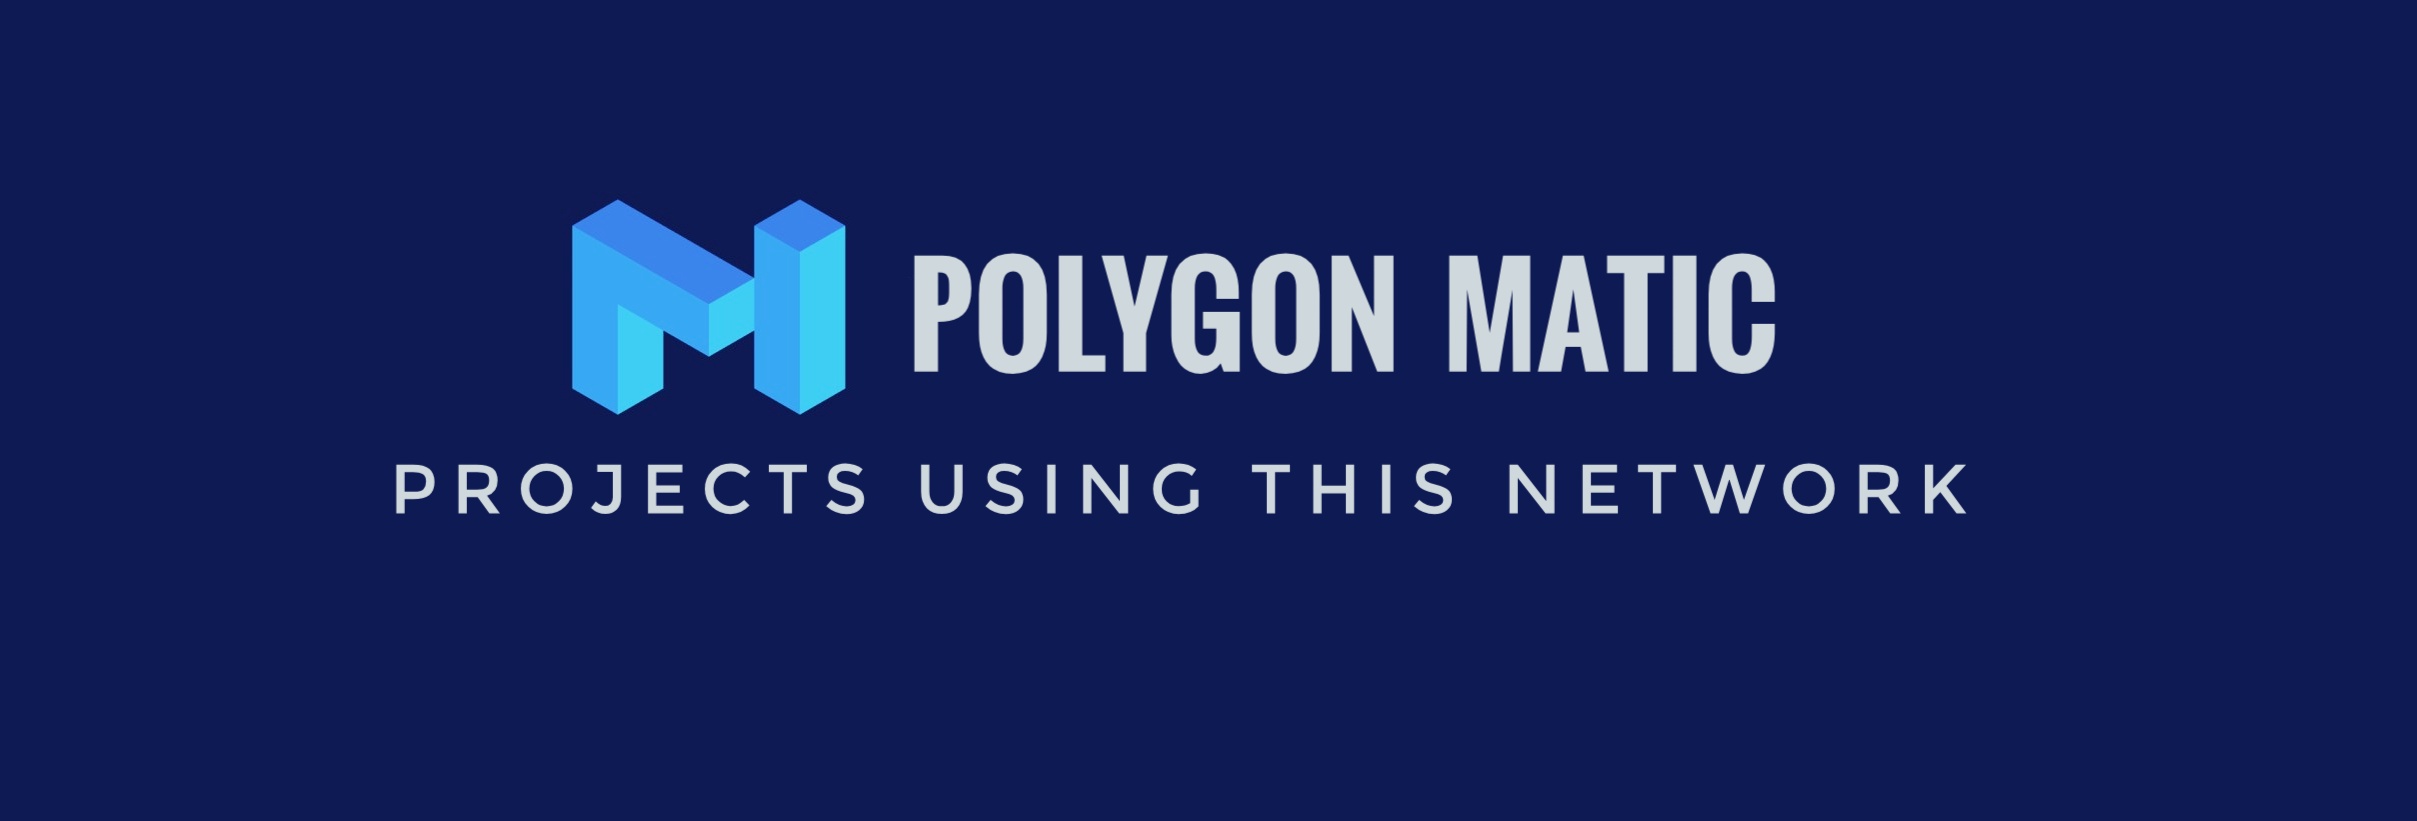 Projects using Polygon Matic Network